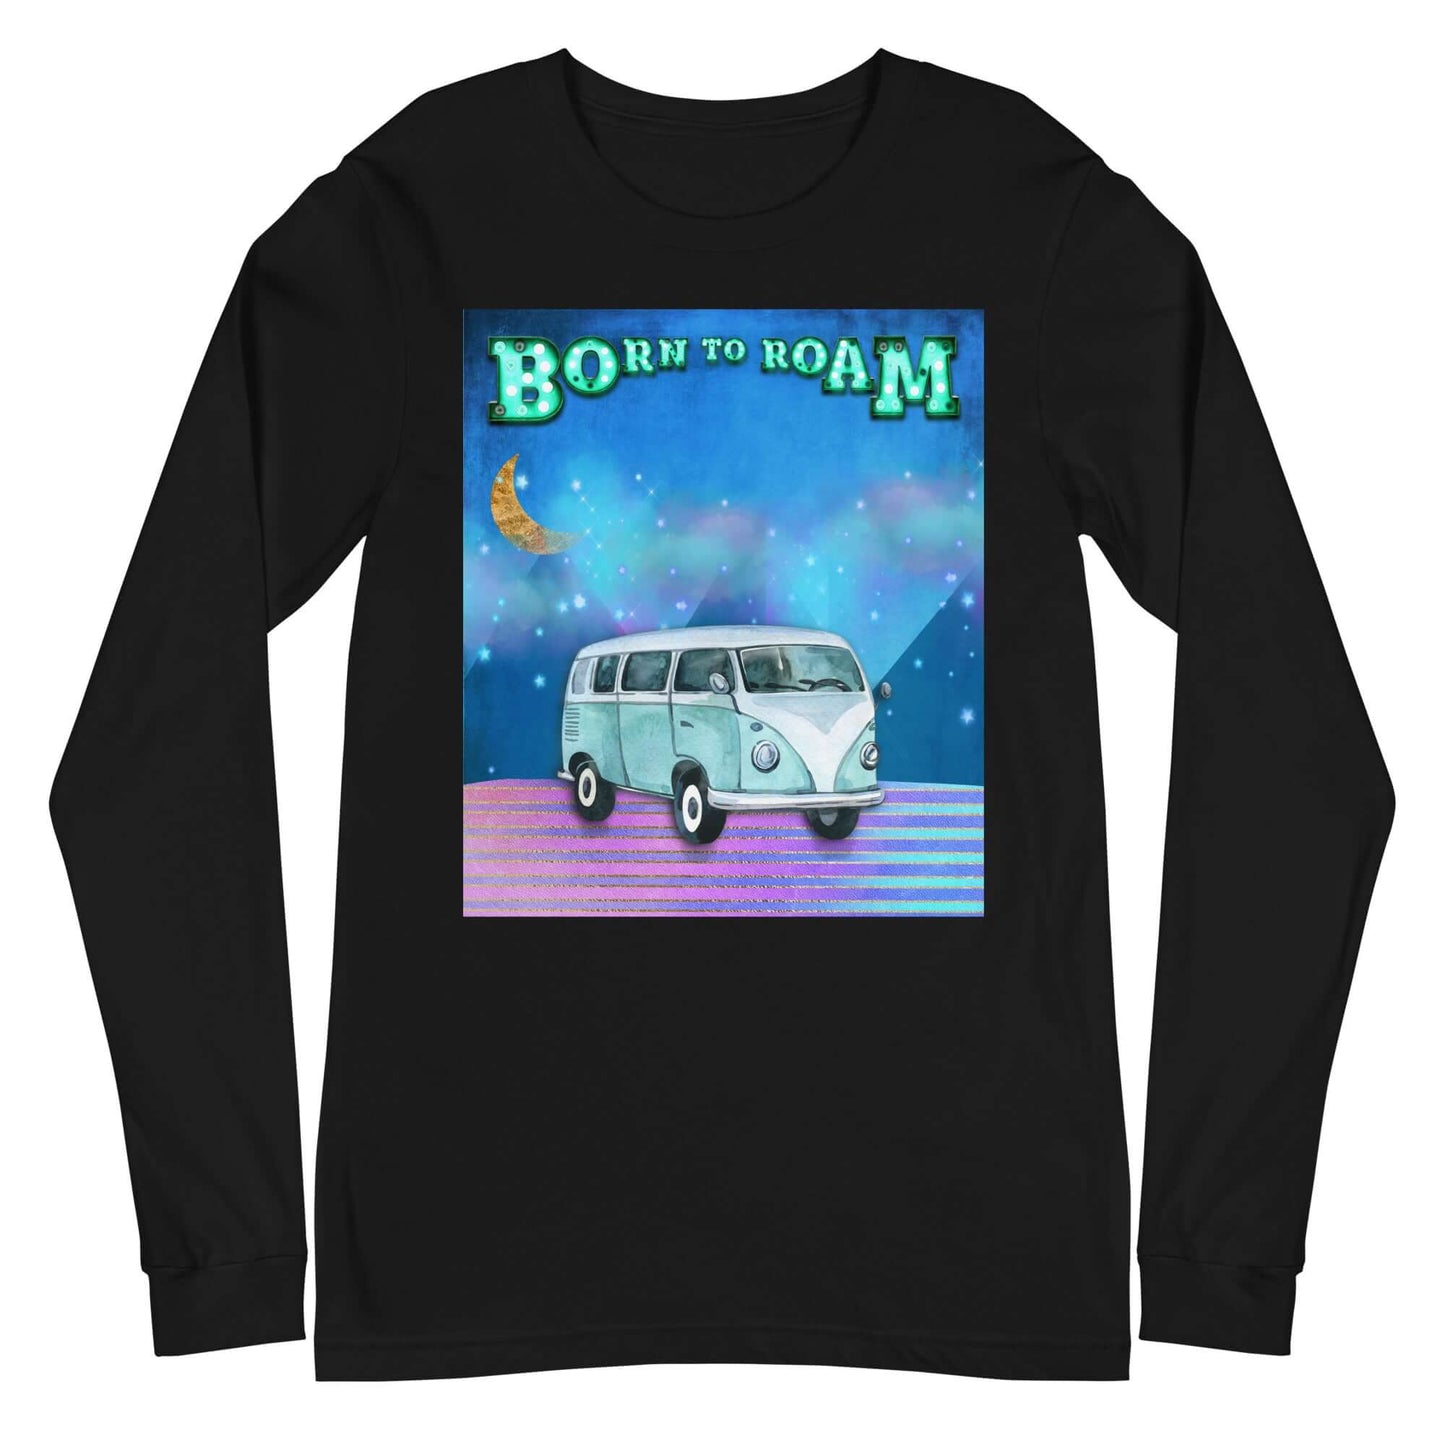 Blue Camper Van Against Blue and Purple Mountains with Moon, Clouds and Stars with “Born to Roam” Marquee Letters Unisex Long Sleeve Tee in Black Heather